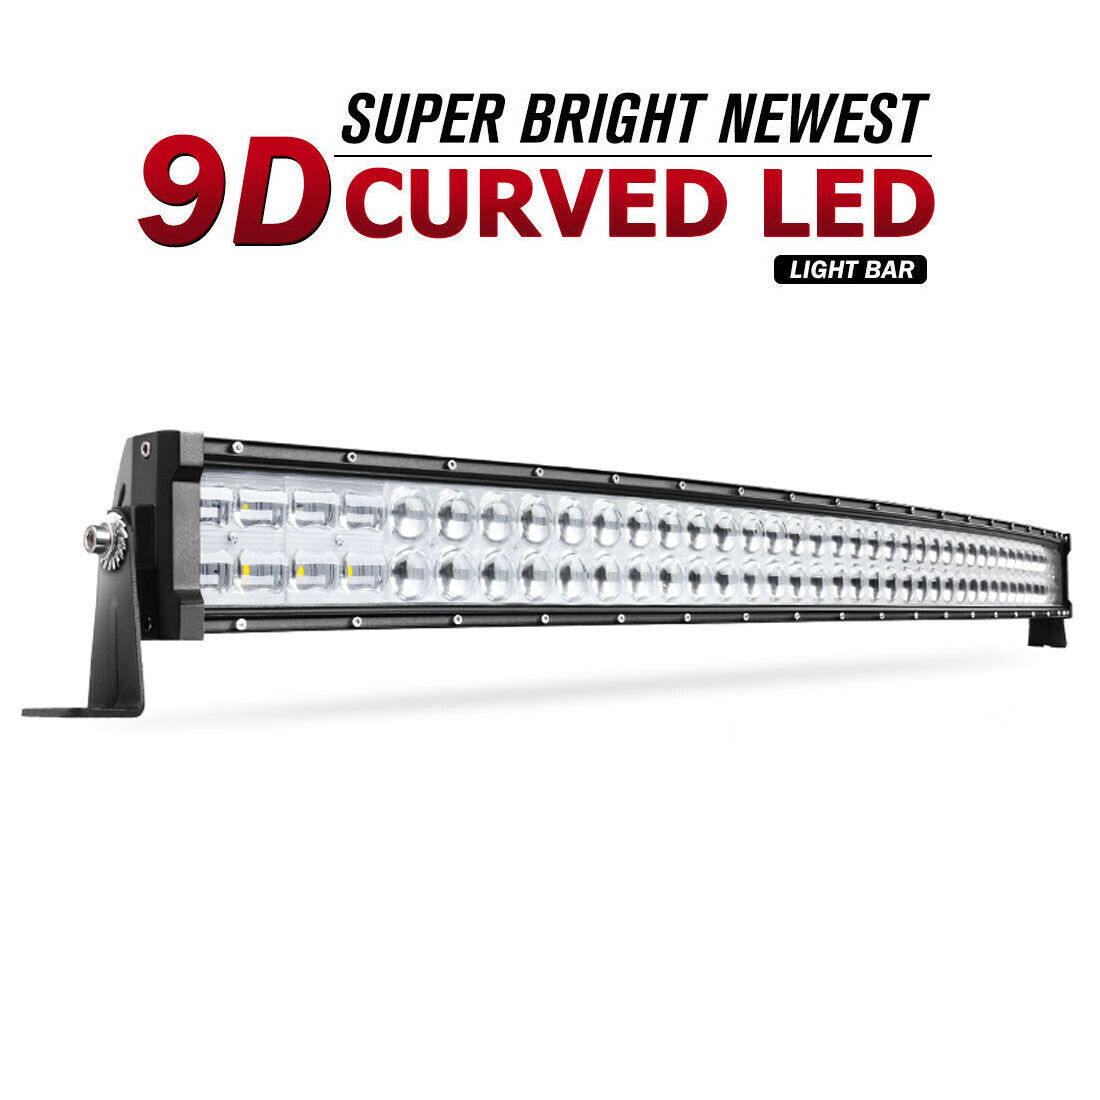 42inch 560w Curved 9d Led Light Bar Spot Flood Offroad Driving Truck 4wd Rzr 40